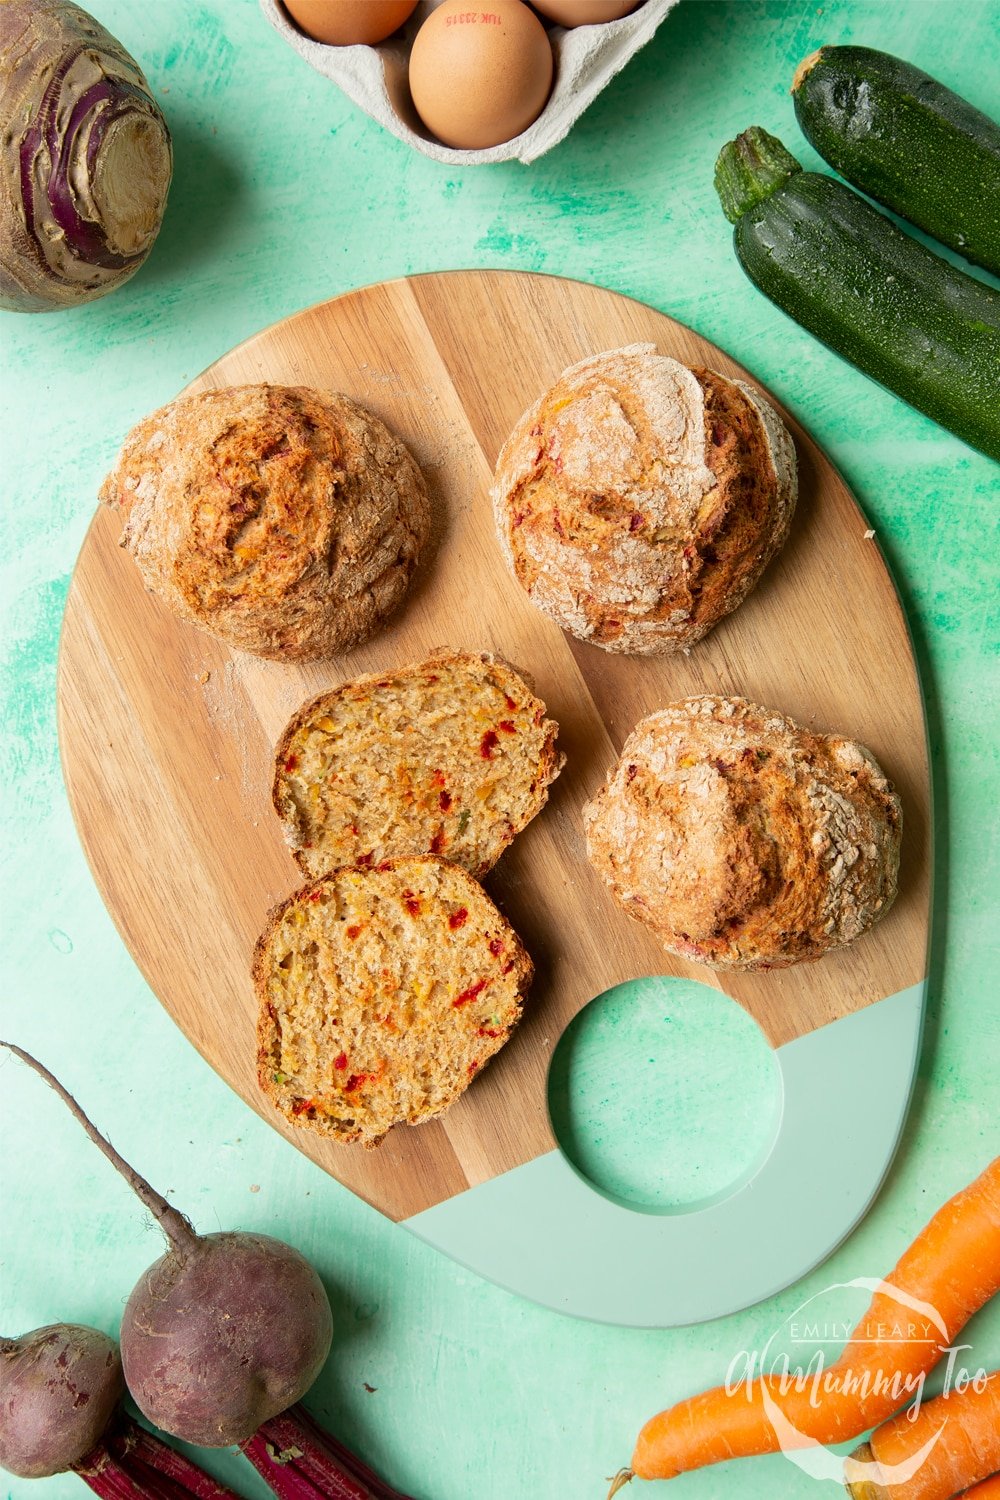 Vegetable soda bread rolls recipe - rolls arranged on a board, one cut open to show the vegetable flecked interior. Surrounded by vegetables.